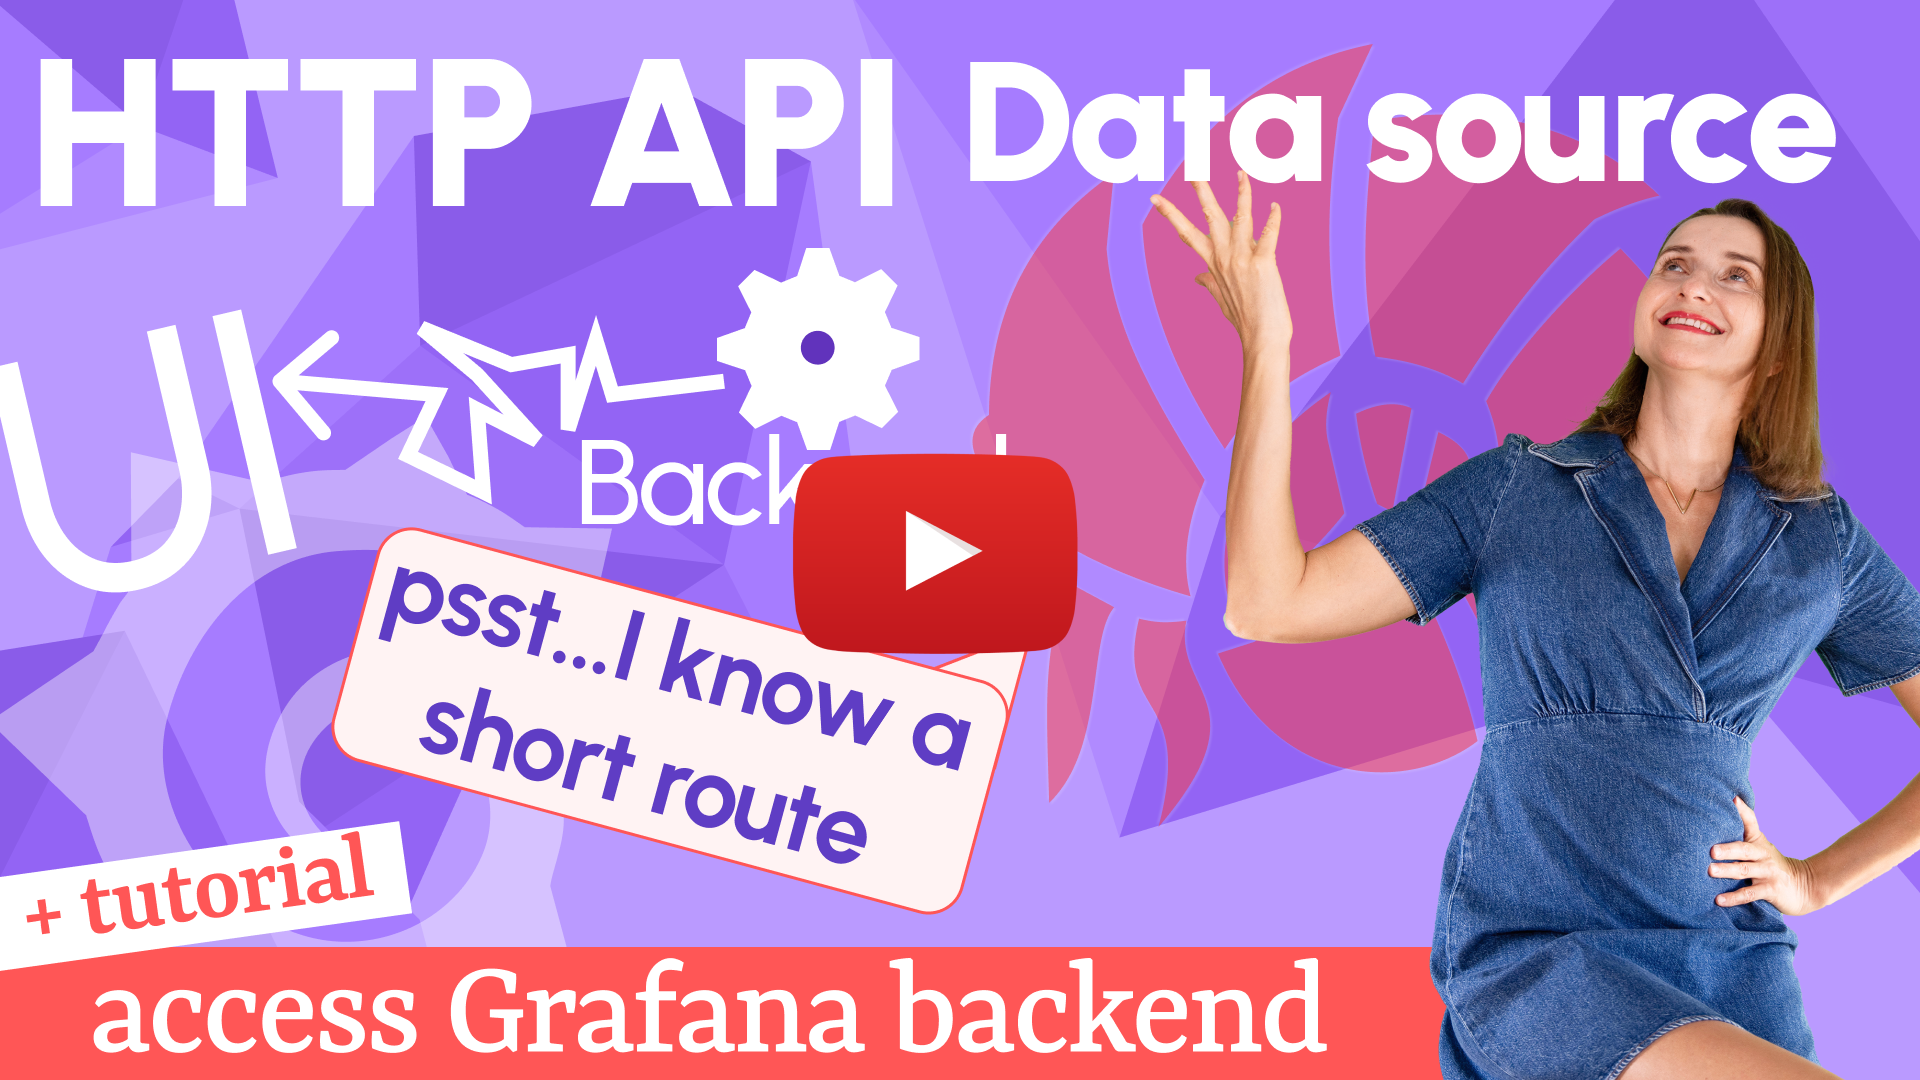 Grafana HTTP API data source | Easy access to Grafana backend | Includes Annotations tutorial